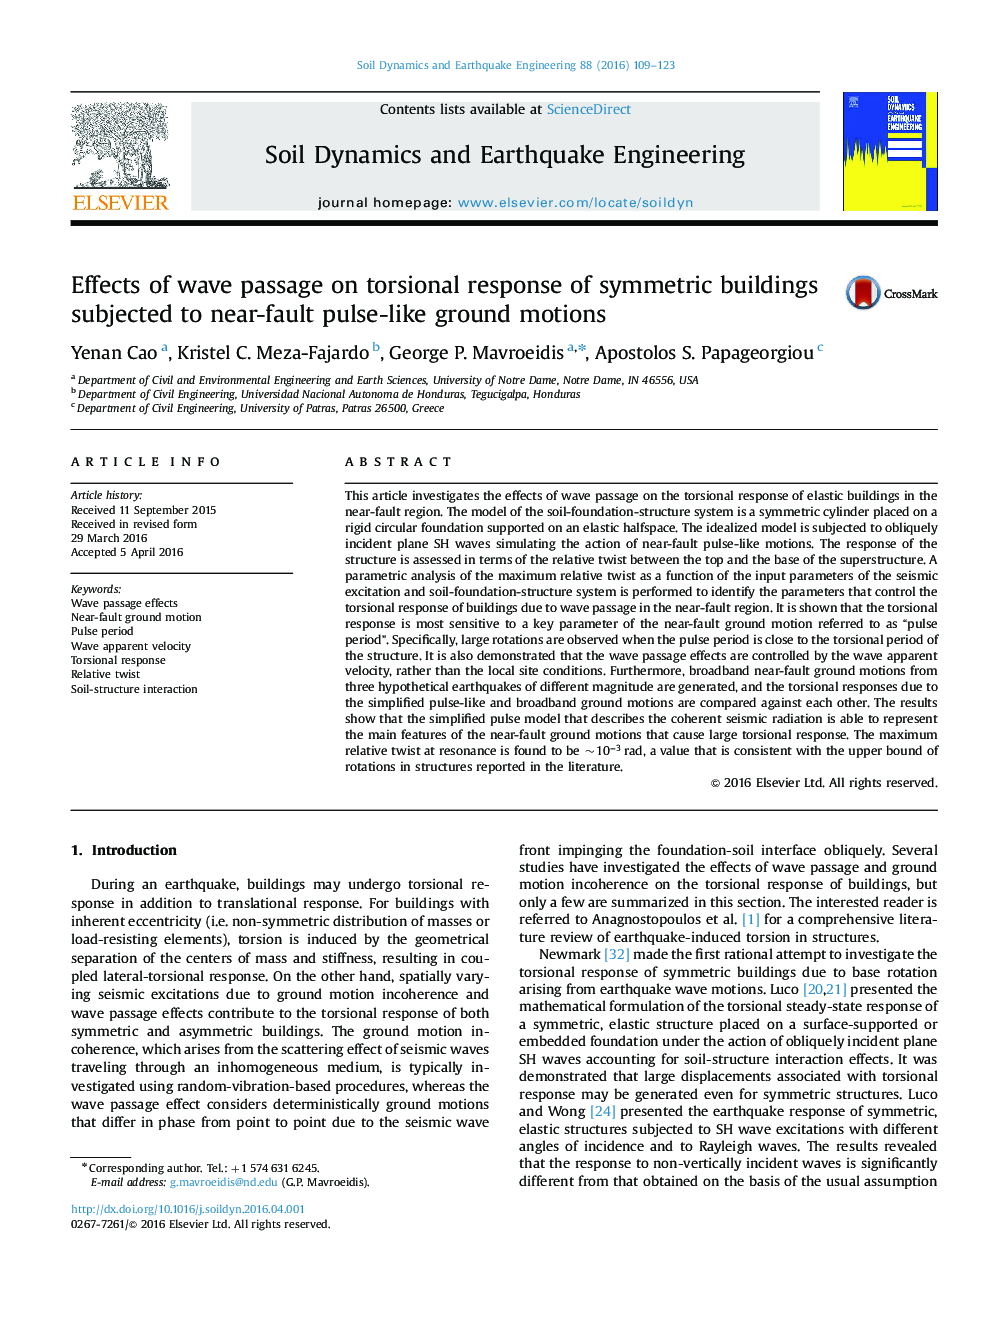 Effects of wave passage on torsional response of symmetric buildings subjected to near-fault pulse-like ground motions